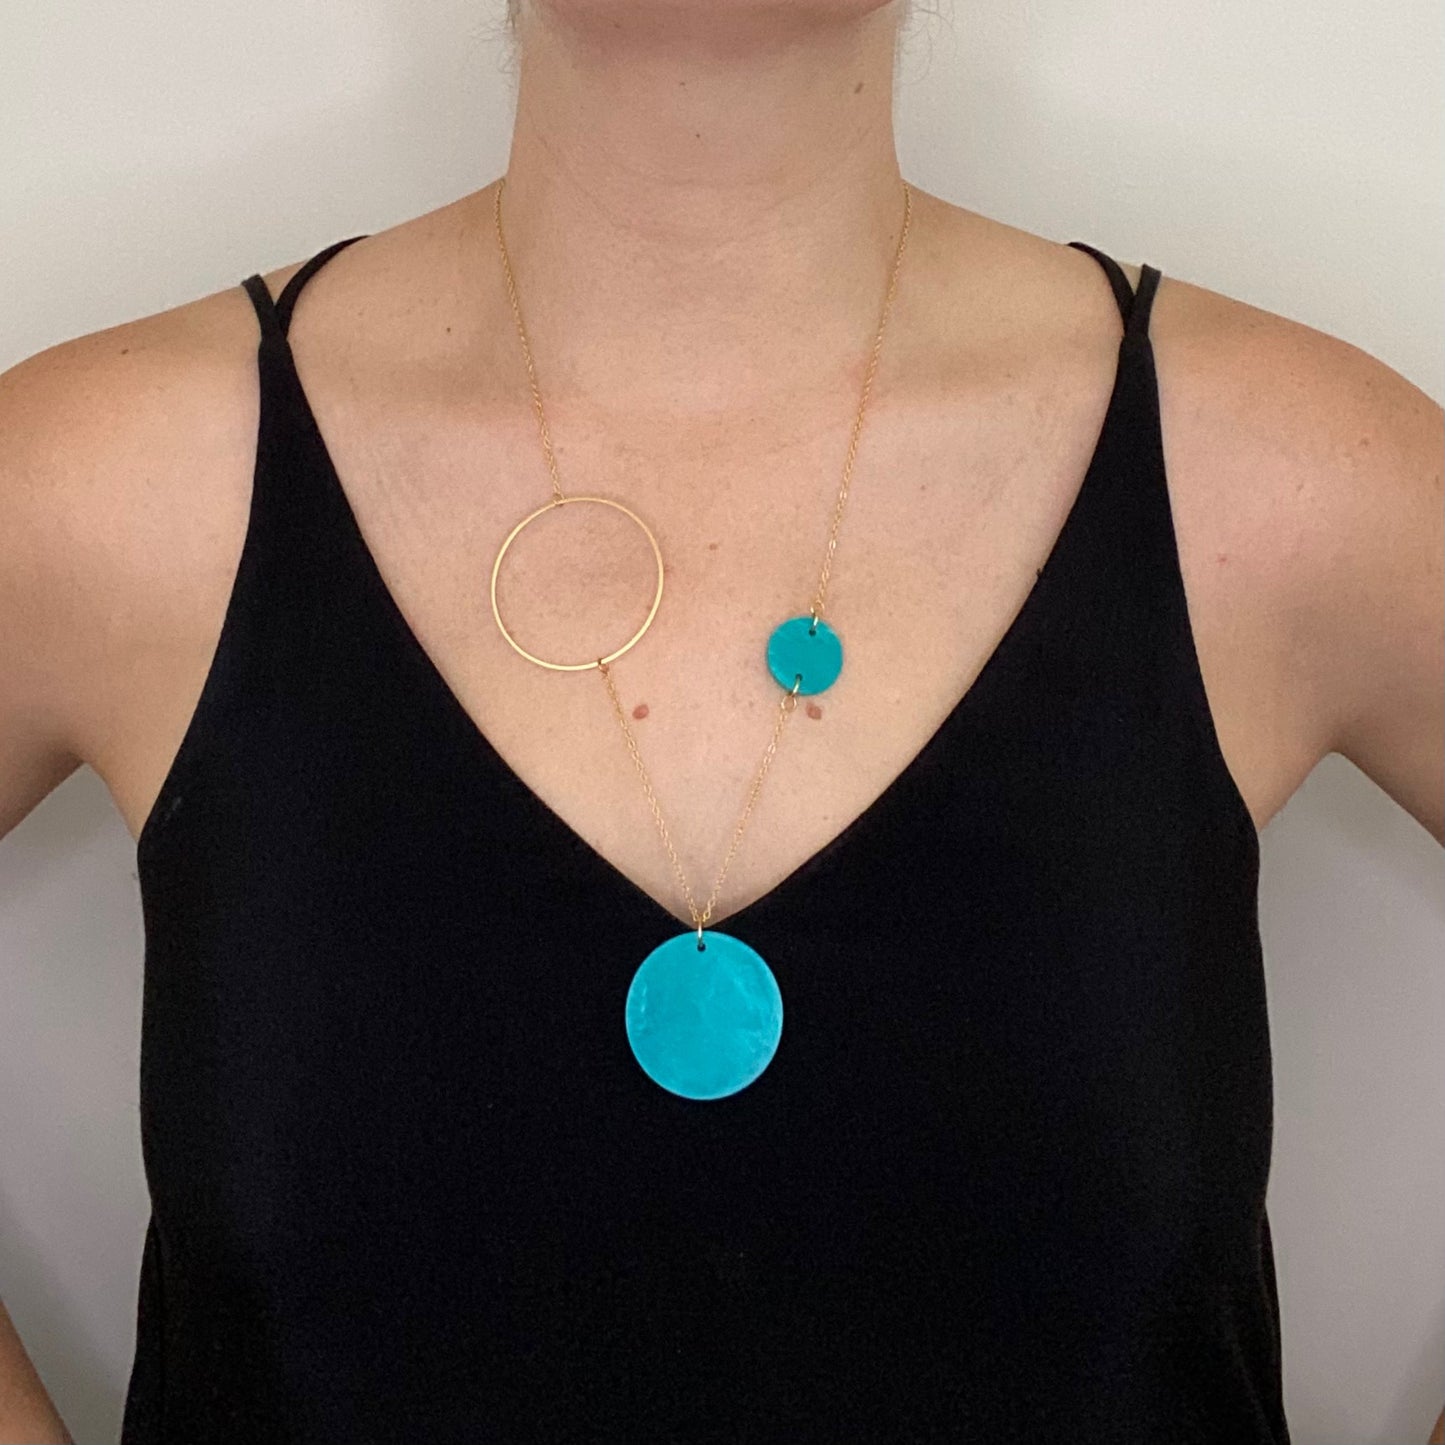 Constellation Necklace- Teal Green Marble